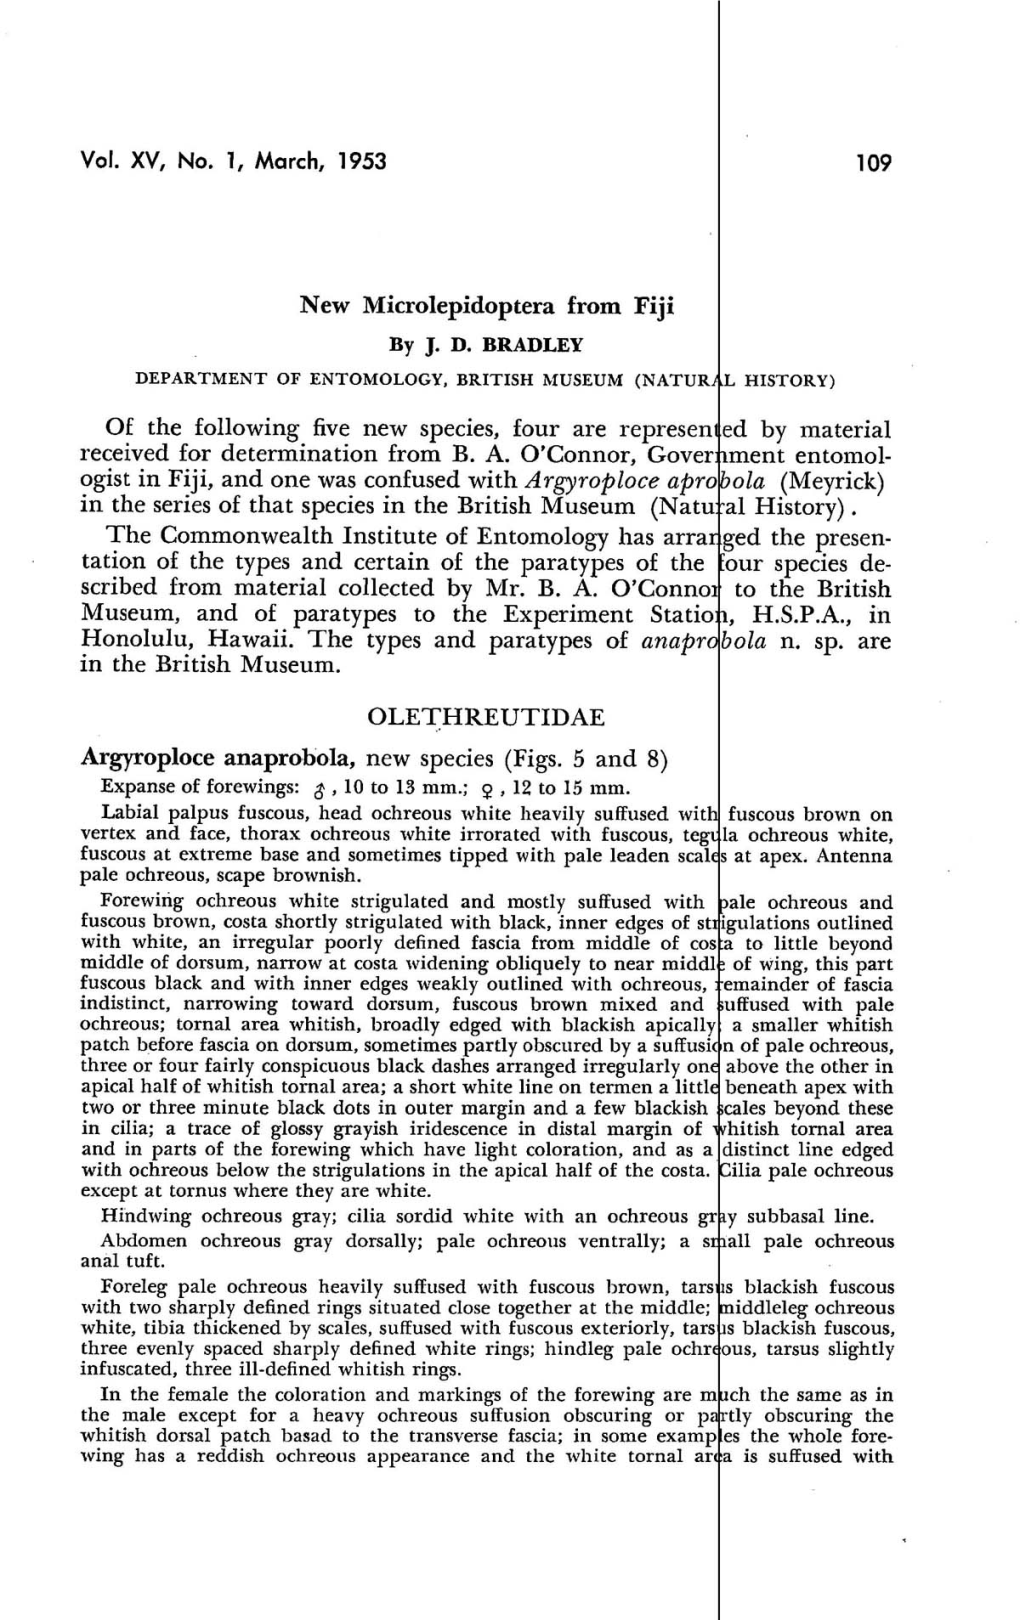 Vol. XV, No.1, March, 1953 New Microlepidoptera from Fiji 109 of the Following Five New Species, Four Are Represen Ed by Materia